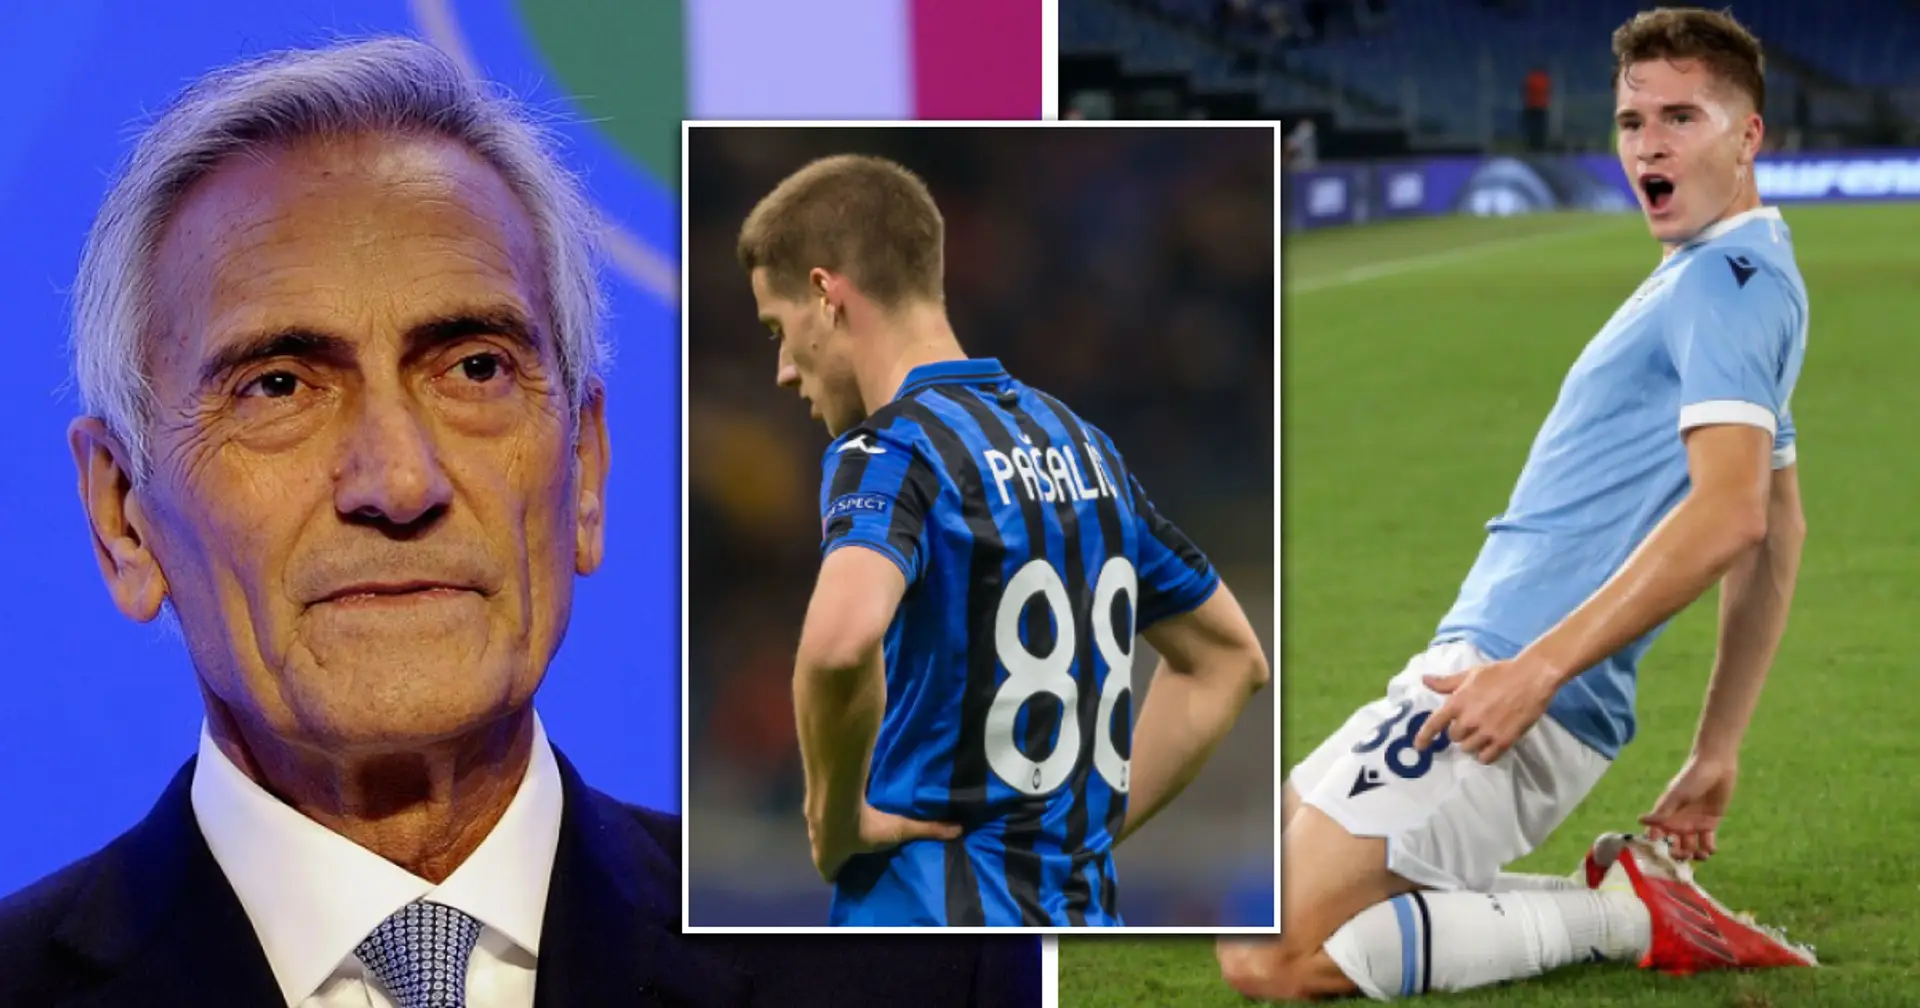 Players in Italy are banned from wearing the No.88 shirt, reason revealed 